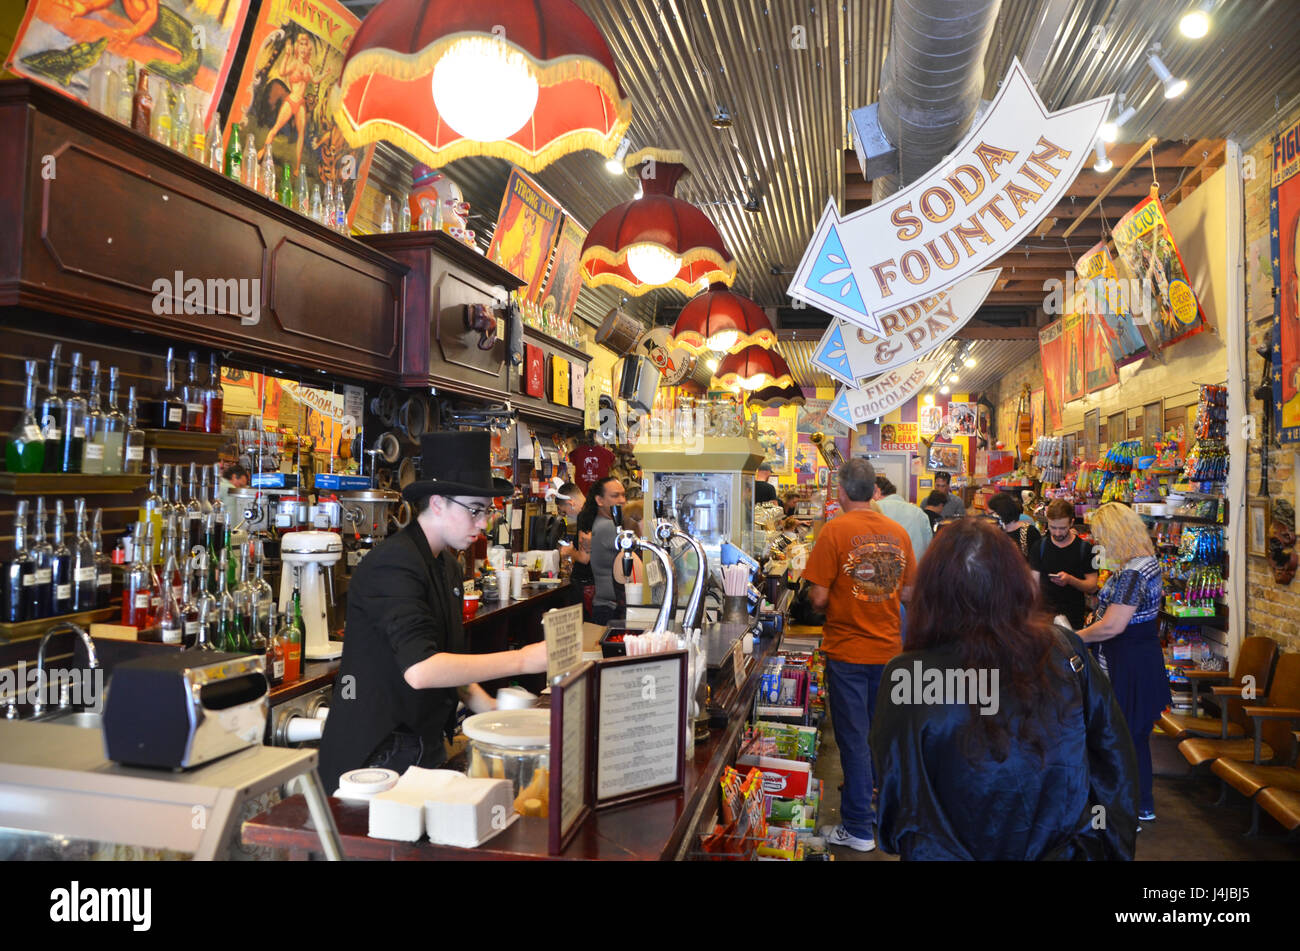 Interior of the Big Top Candy Shop on S Congress Avenue in Austin, Texas, selling traditional American sweets and candies Stock Photo